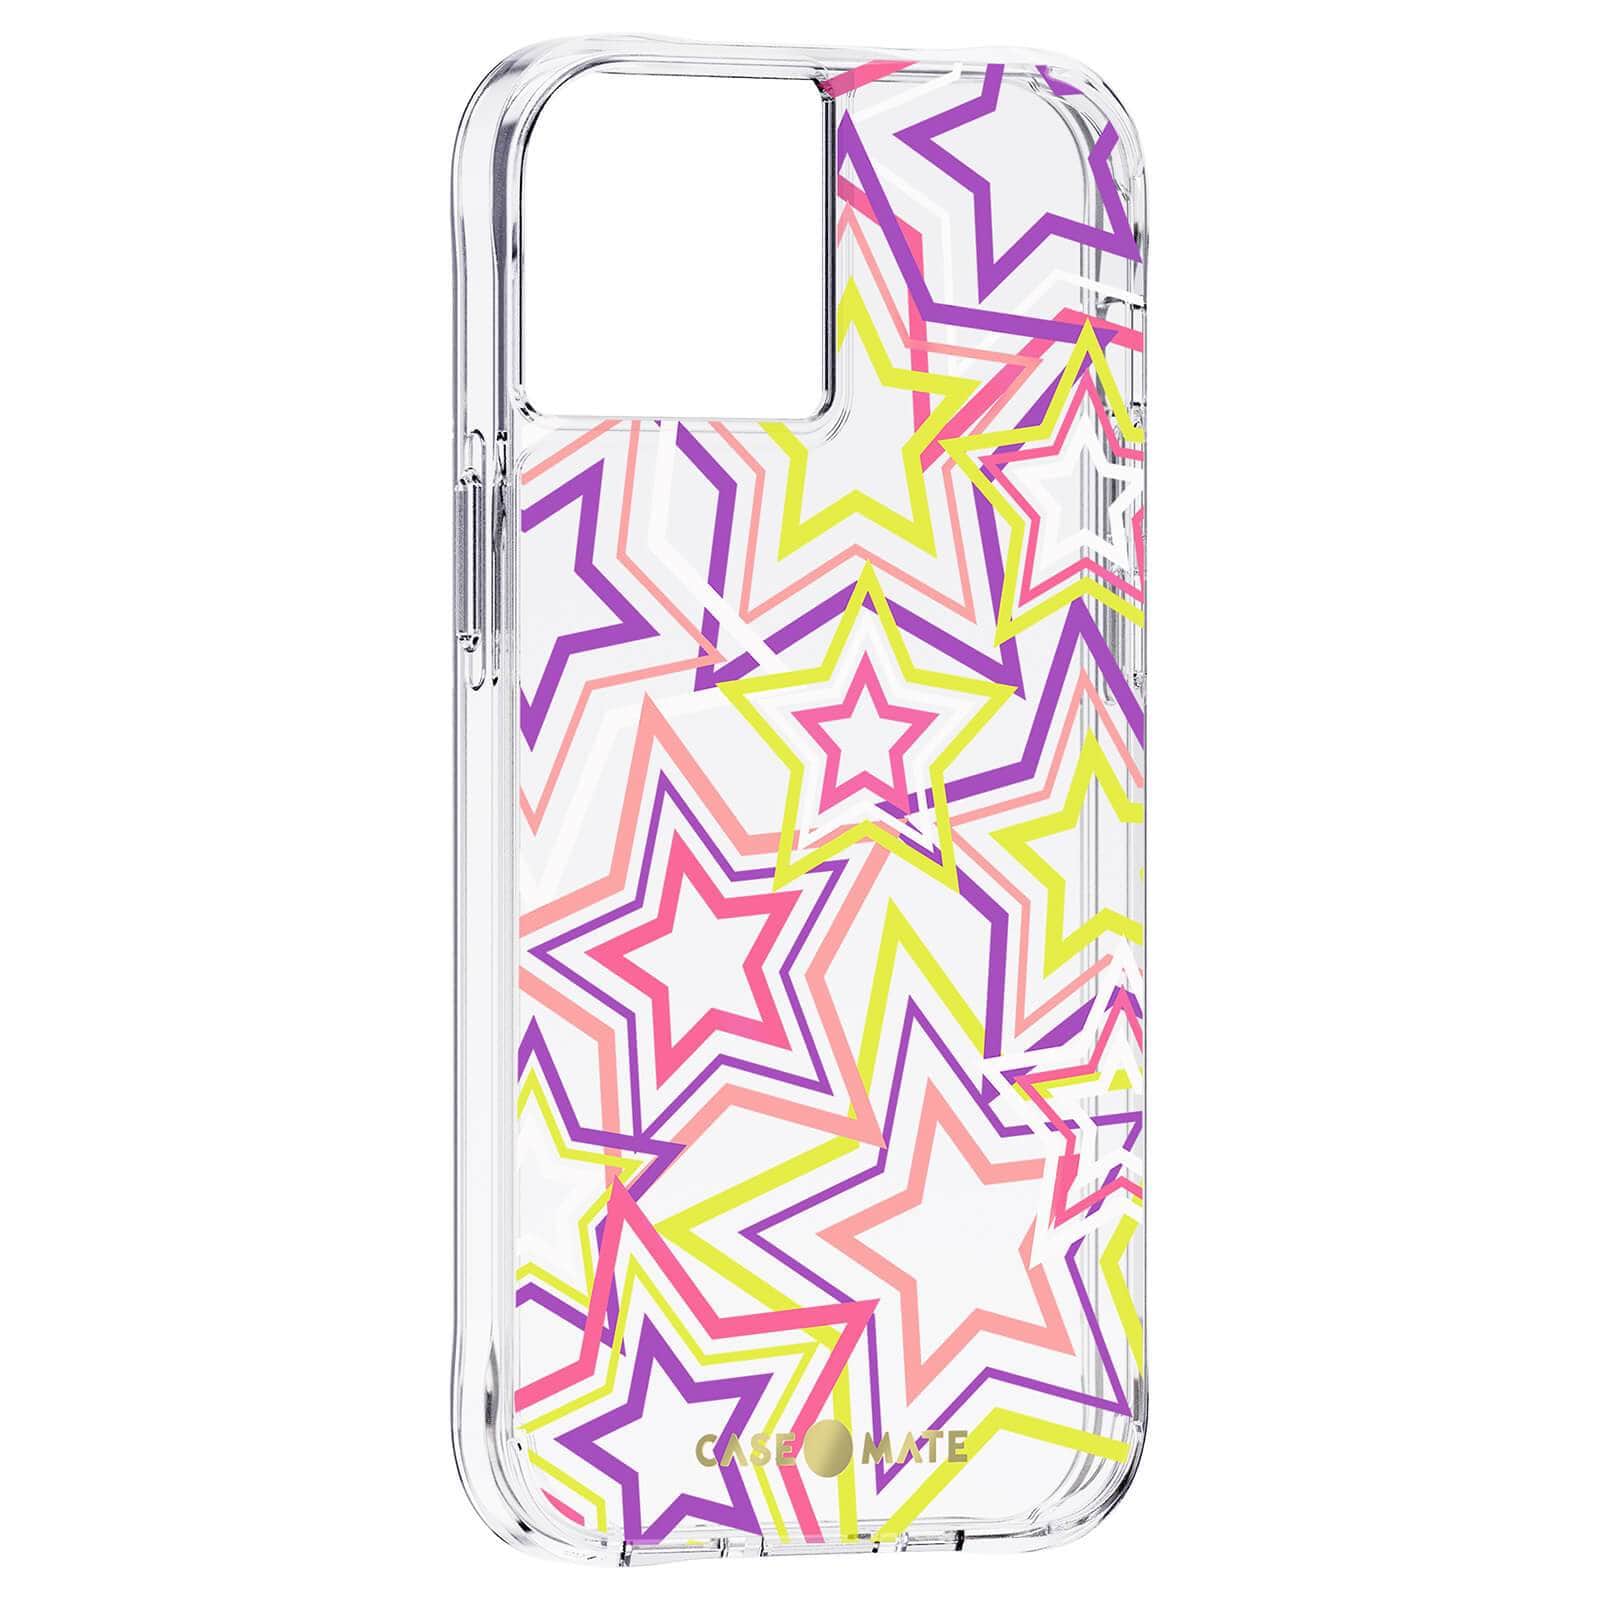 Partially clear case with pink, yellow and purple neon stars for iPhone 13. color::Neon Stars